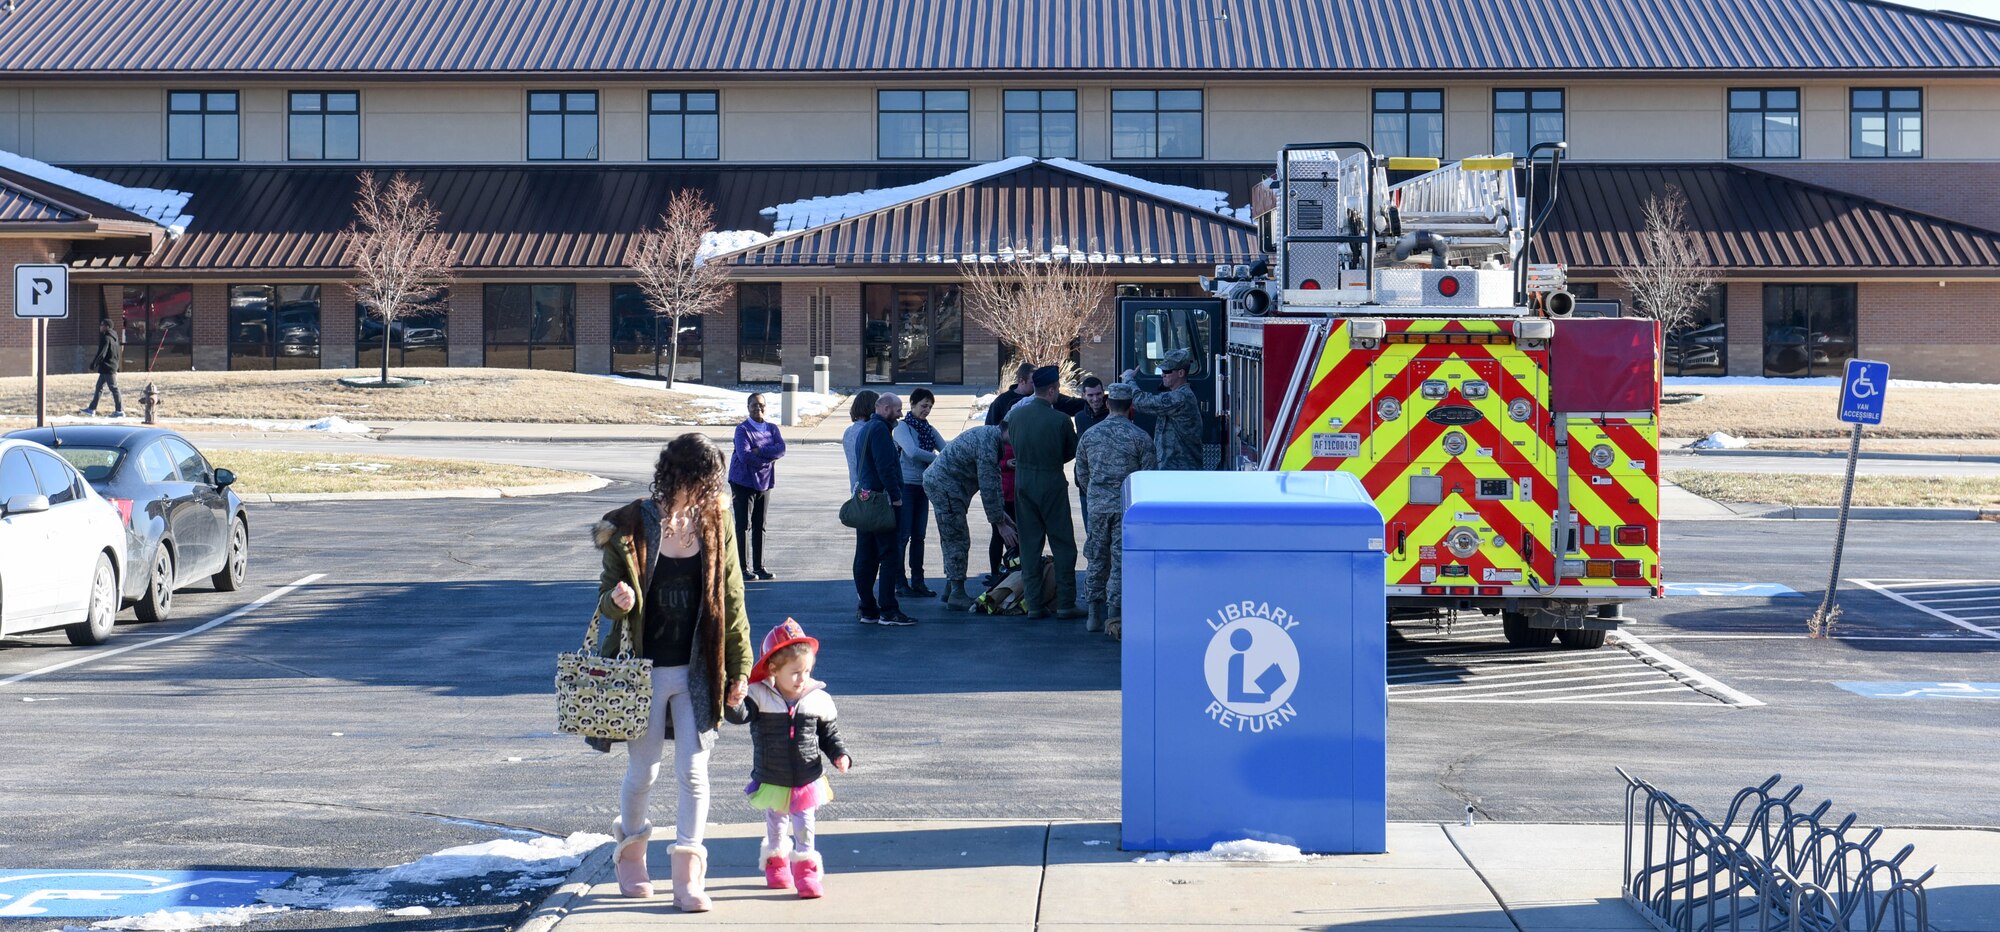 Members of the 28th Civil Engineer Squadron Fire Department visit with families on Ellsworth Air Force Base, S.D., on Dec. 13, 2018, following the conclusion of “Santa and Me Story Time” at the Holbrook Library. Firefighters escorted Santa Claus to the library earlier that day so he could read to the base’s children. After Santa left, the firefighters invited the Airmen and their families to tour a fire truck. (U.S. Air Force photo by Airman John Ennis)